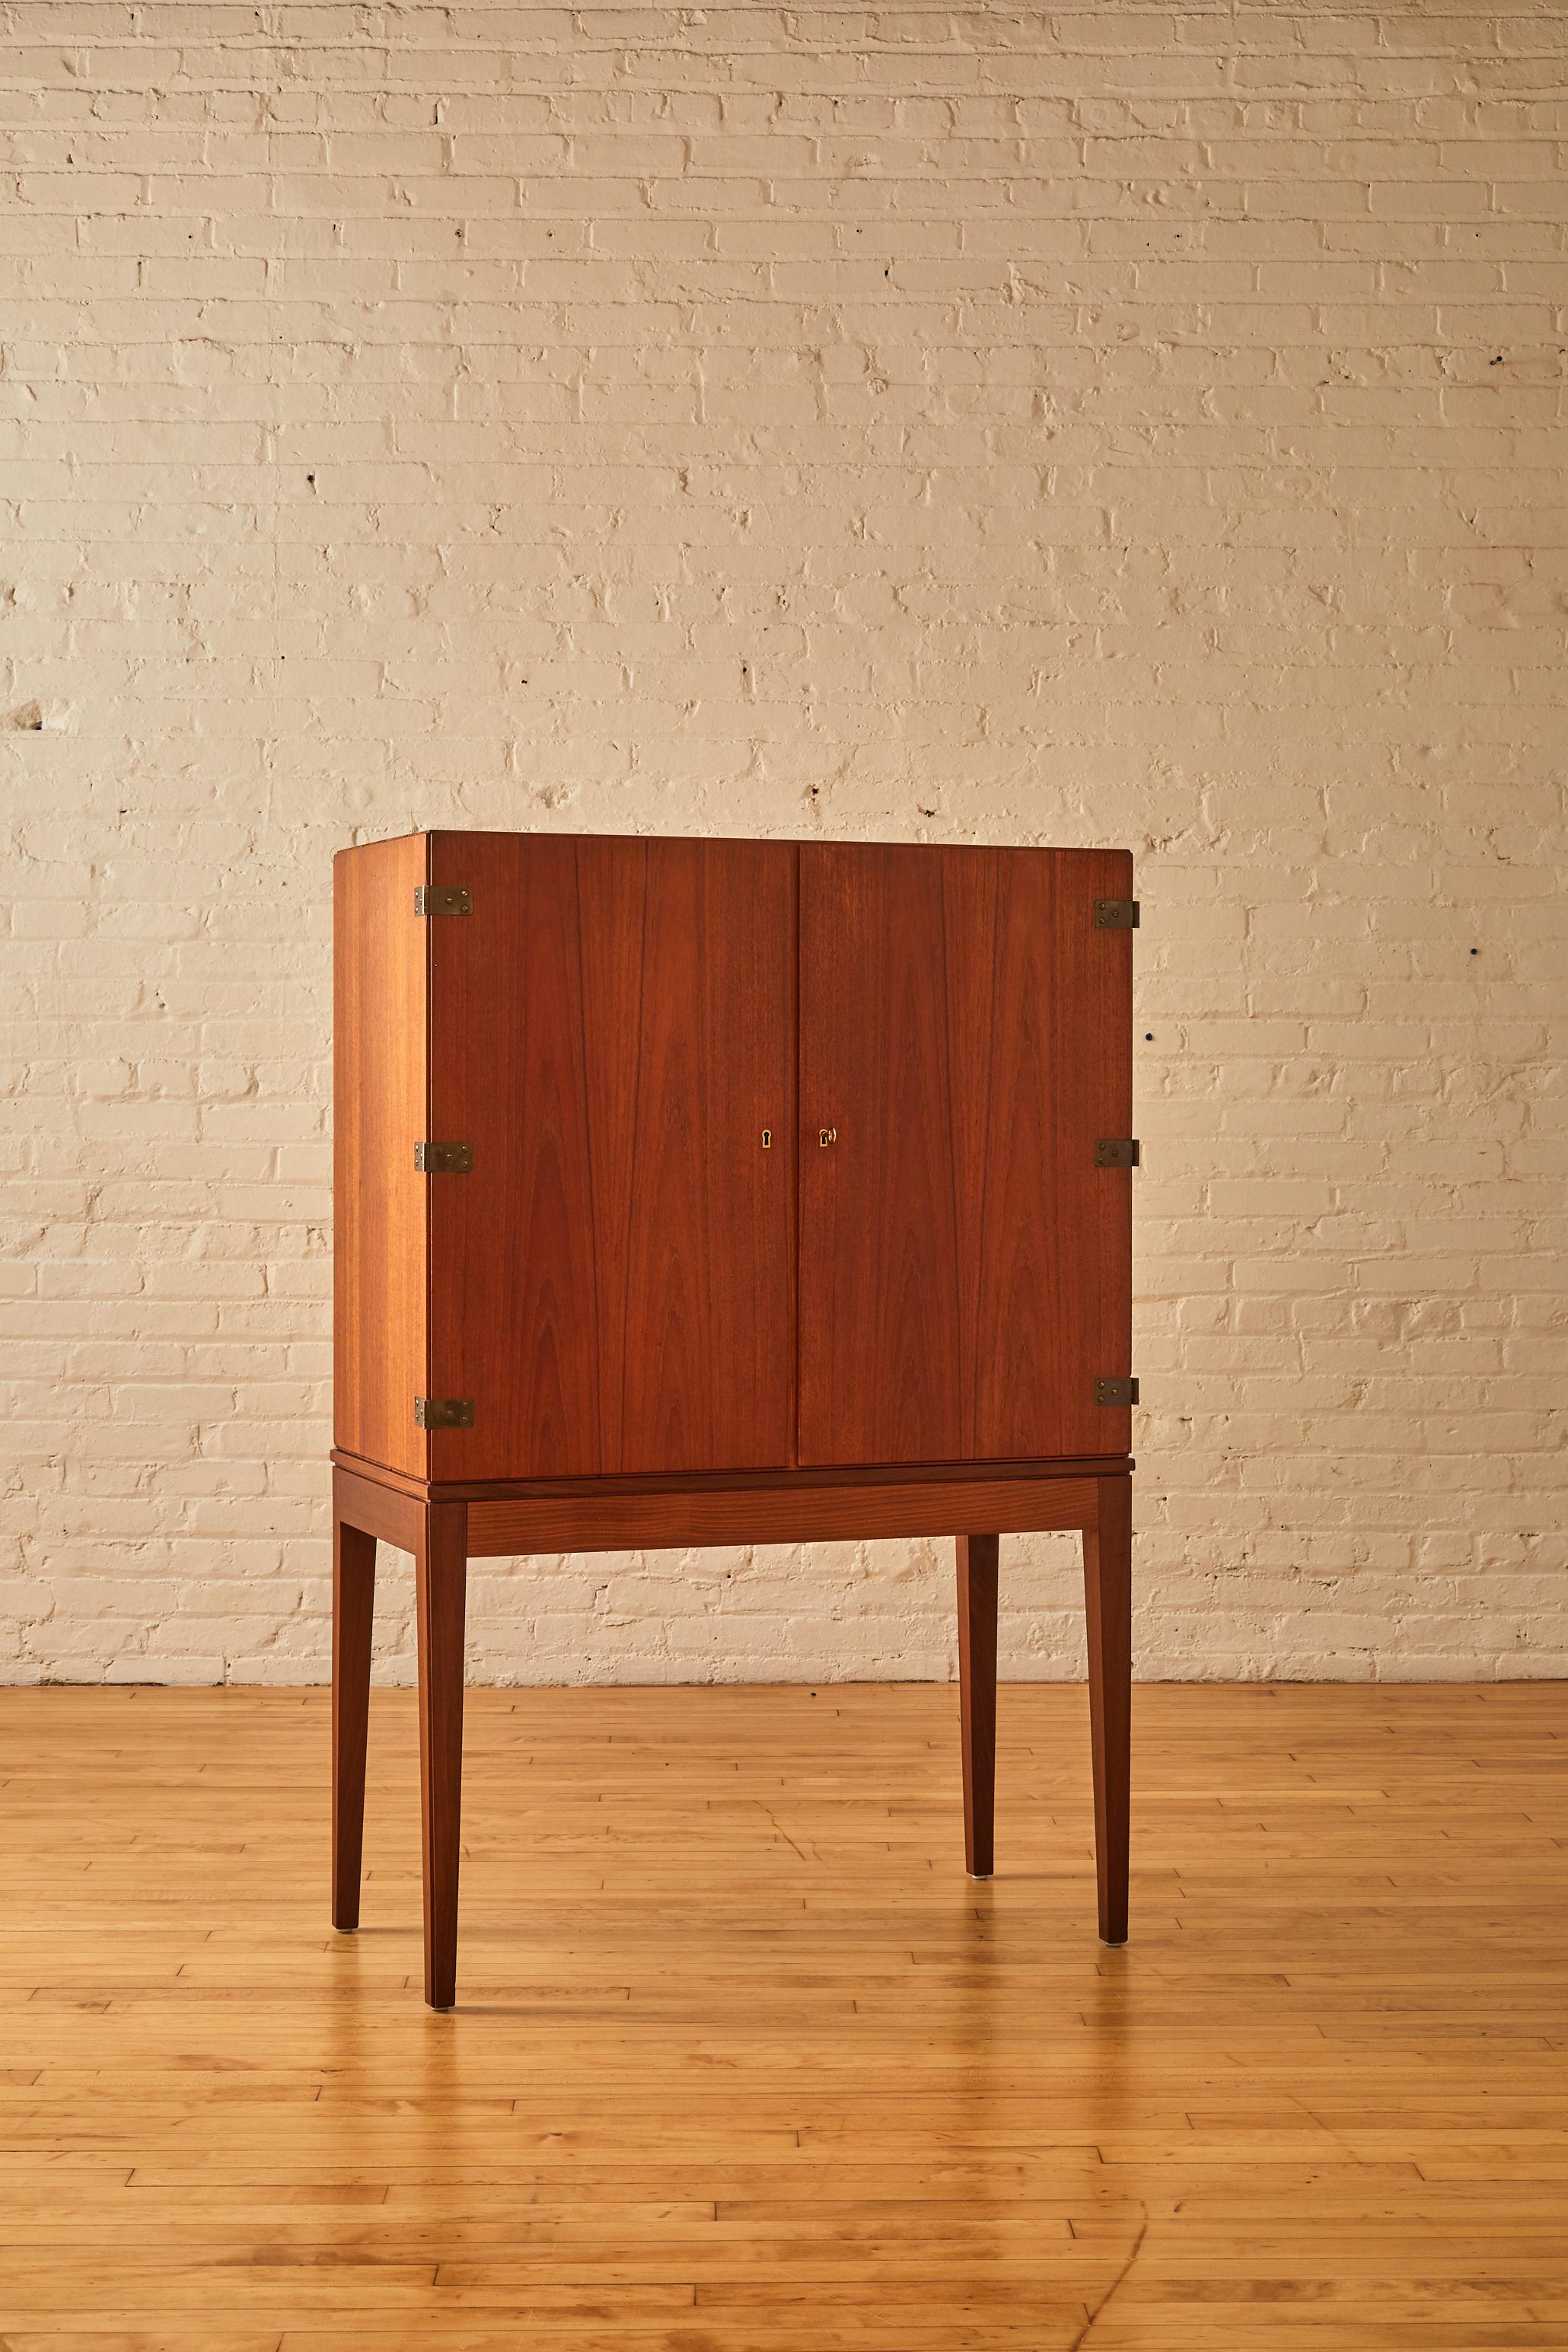 Svend Langkild cabinet by Langkild Mobler with a fitted interior featuring pull-out drawers and shelves with exposed dovetailed joints. The chest sits on tapered legs. (one key included).

